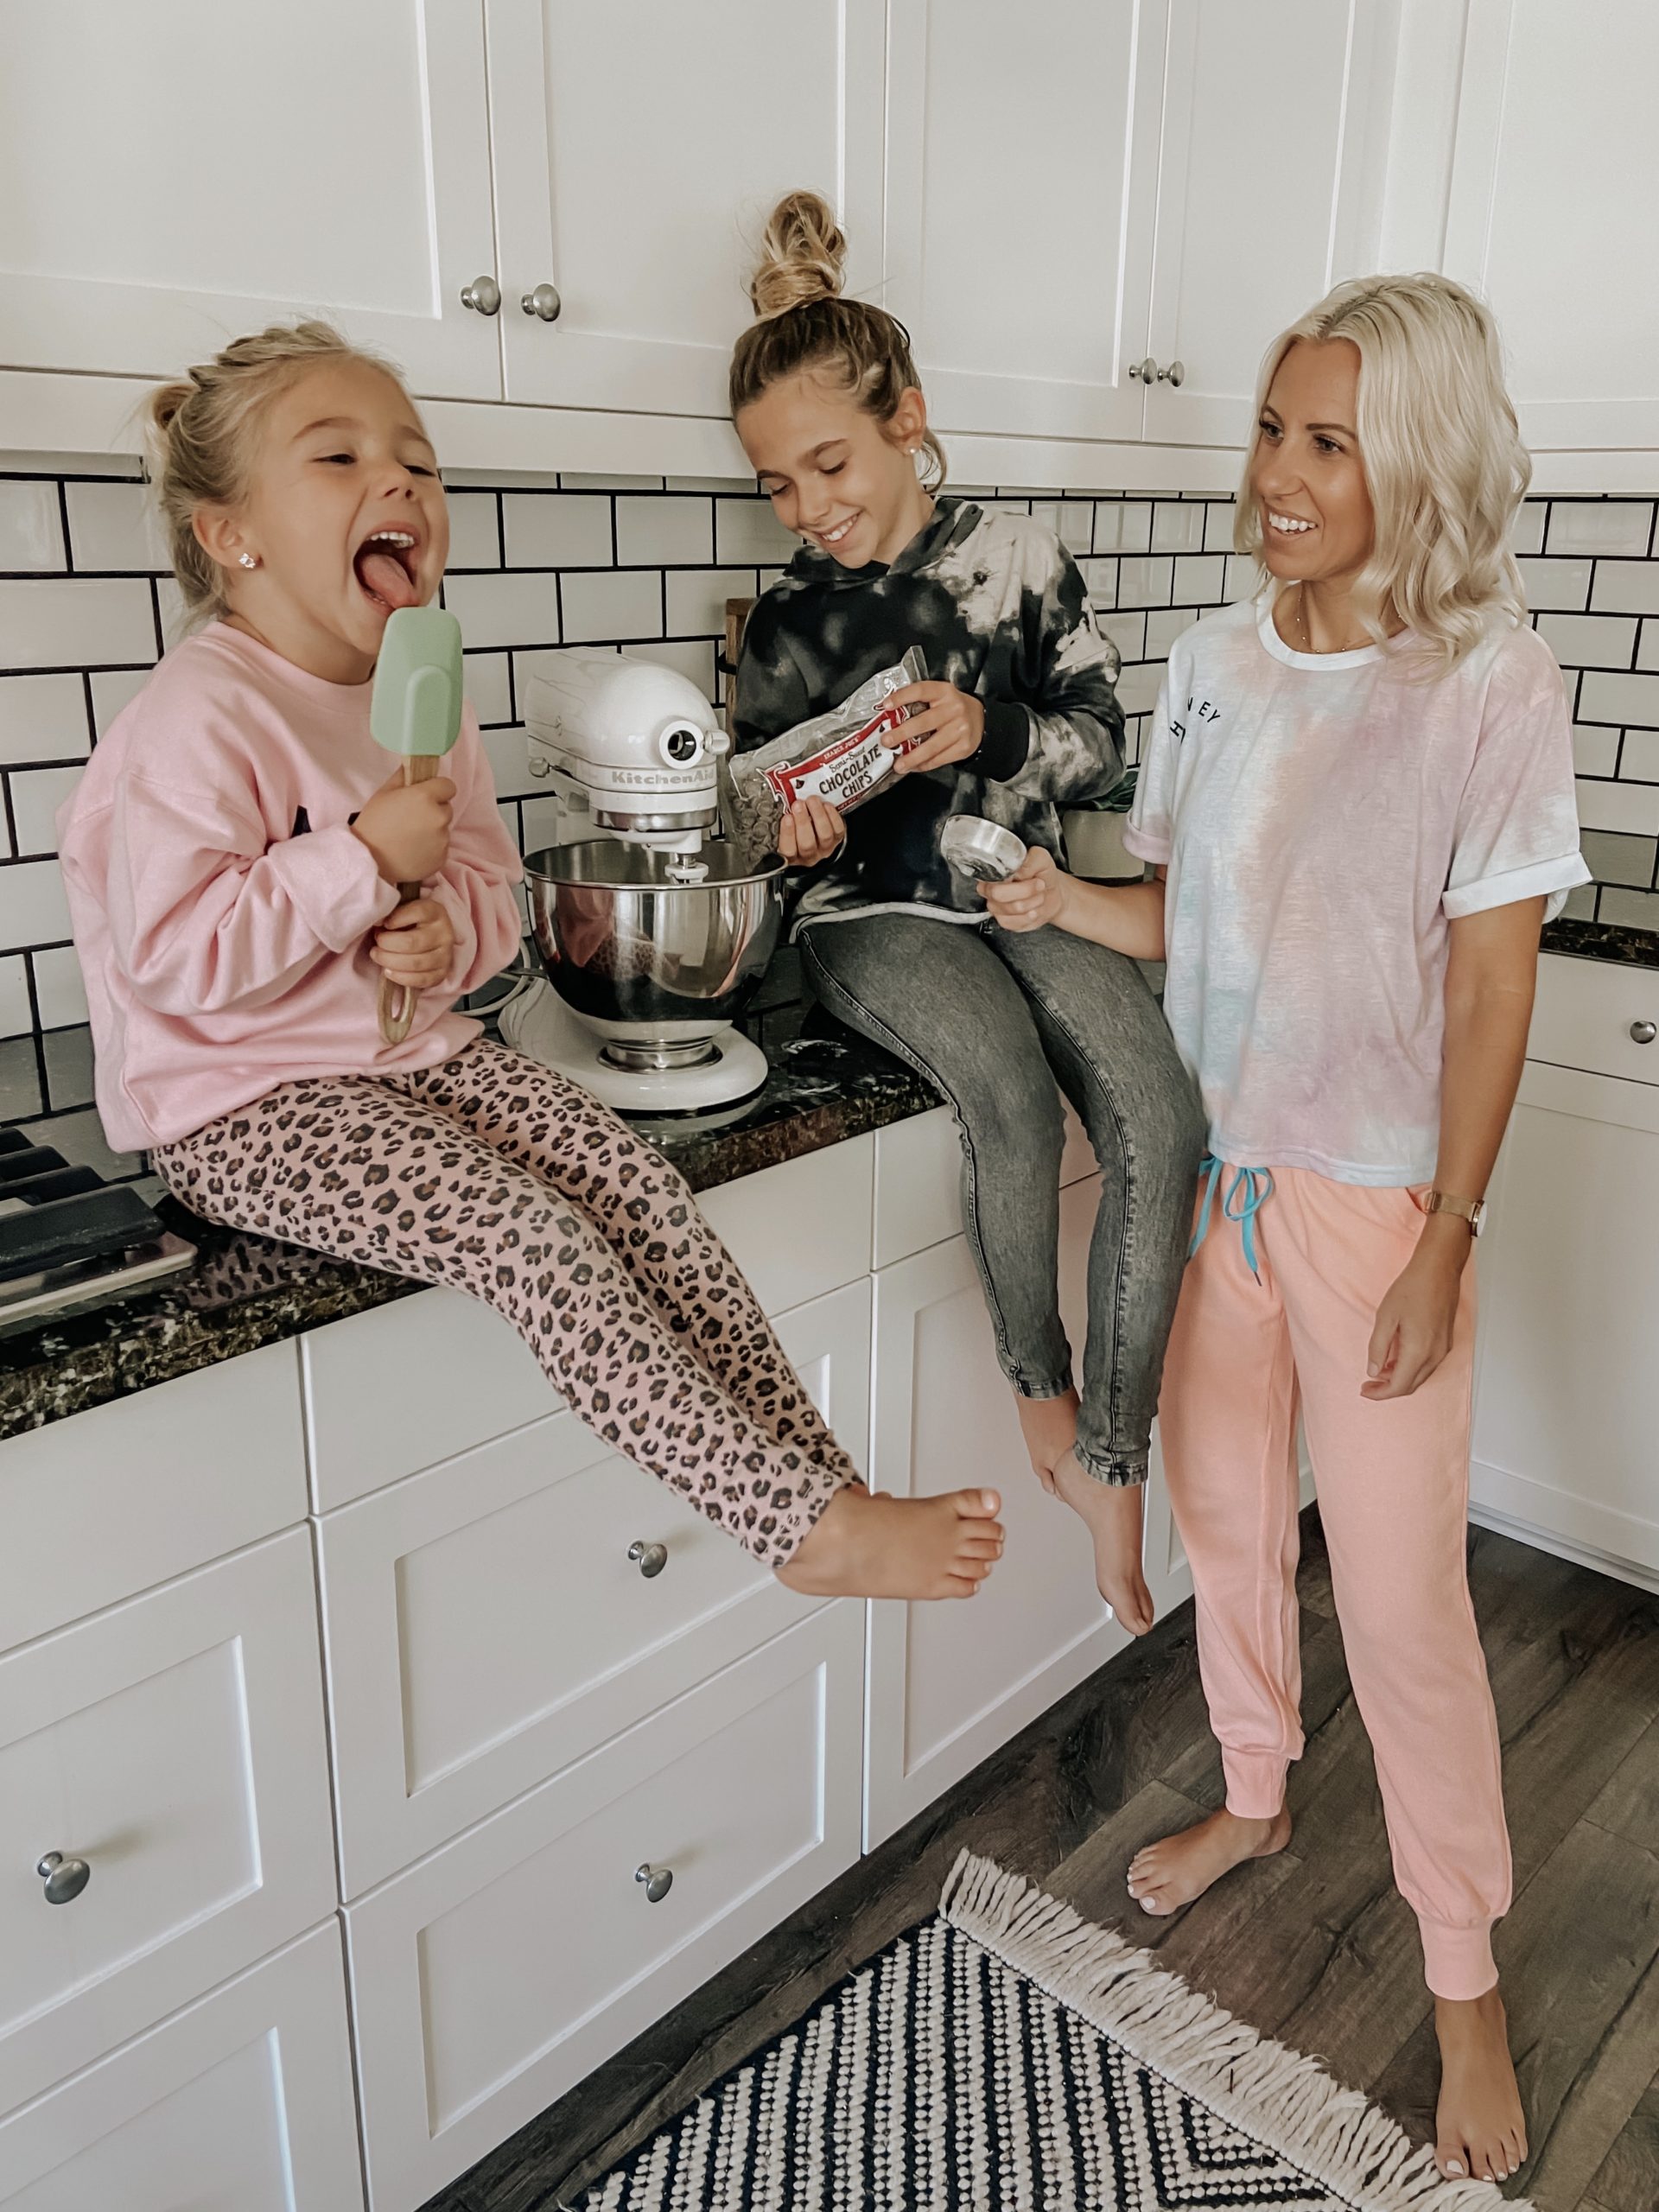 BAKING BANANA BREAD WITH MY GIRLS- Jaclyn De Leon Style: Having fun with my kids in the kitchen and sharing Lulu's famous chocolate chip banana bread recipe